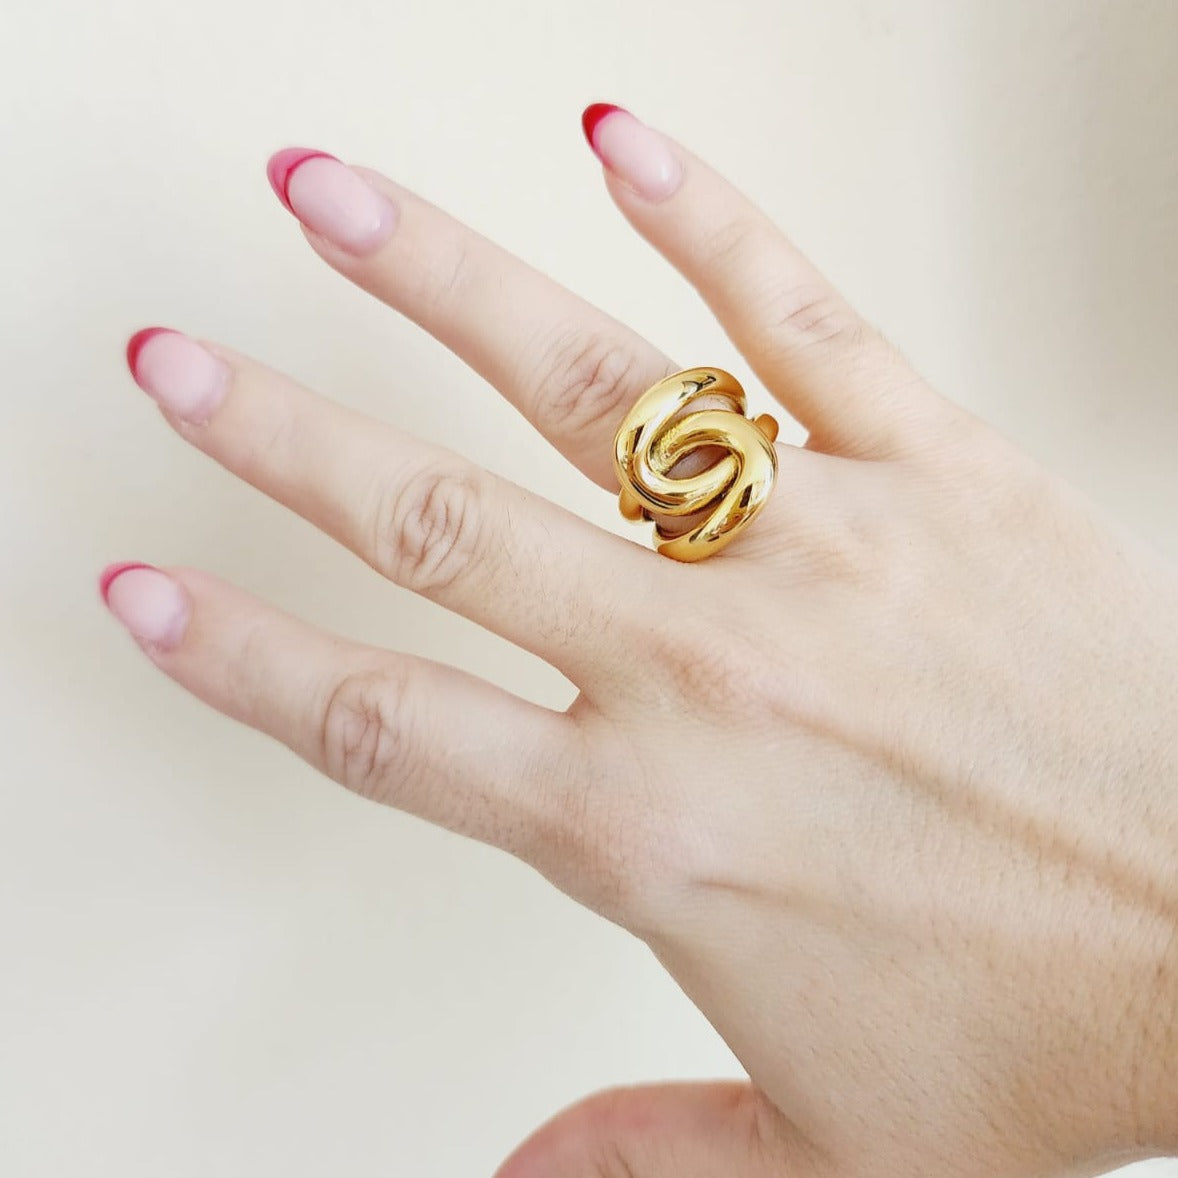 Water Resistant Jewelry, Knot Gold ring, Knot bold ring, Fashion Gold Color Irregular Ring Fashion Hollow Rings For Women Man Minimalism  Water Resistant sweat resistant jewelry water resistance jewelry  Vintage Rings  Vintage Modern Rings  tarnish free jewelry